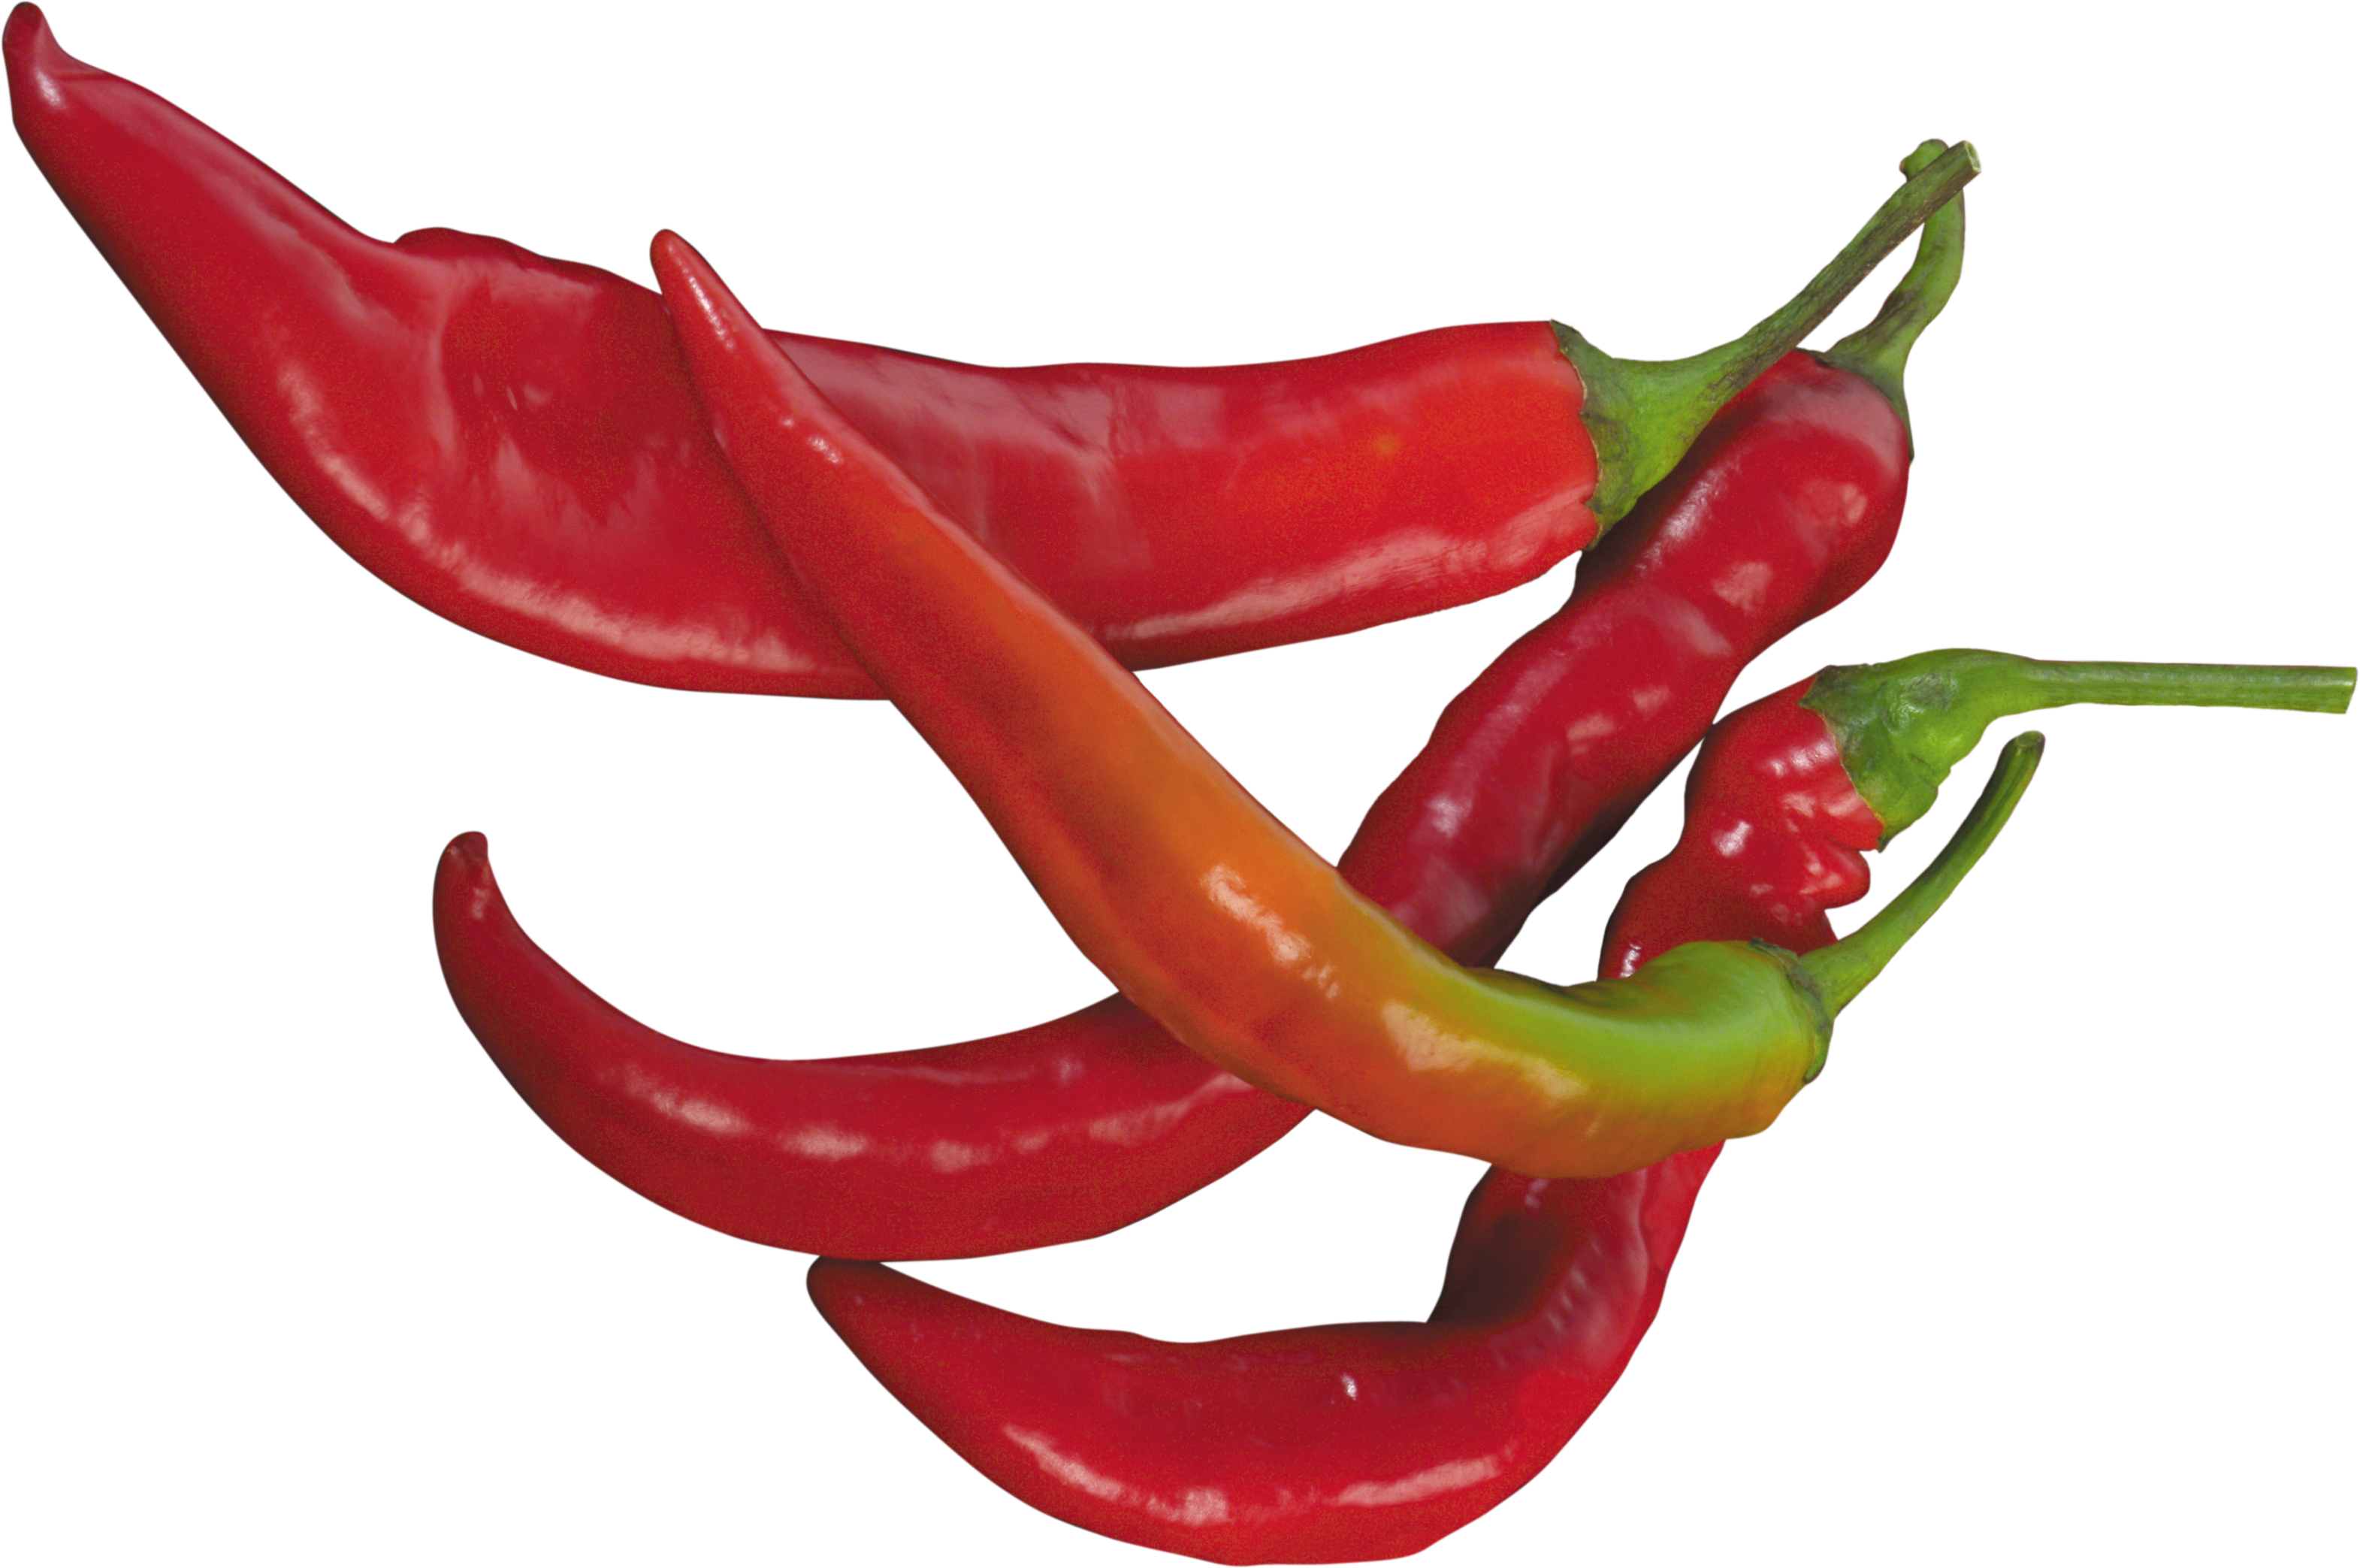 Chillis and Spices